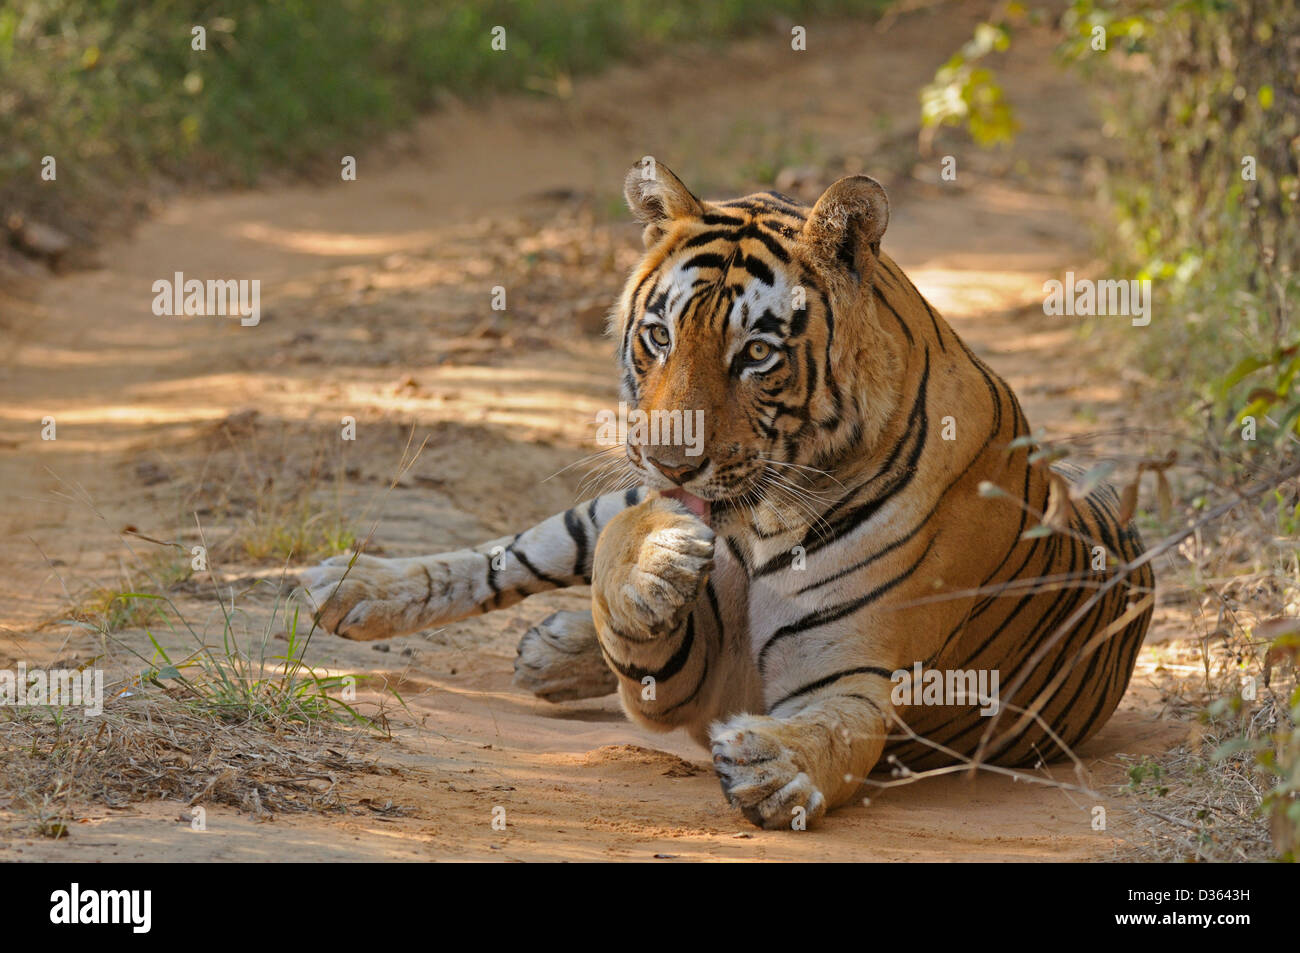 Male tiger in the dry deciduous habitat of Ranthanbhore tiger reserve Stock Photo